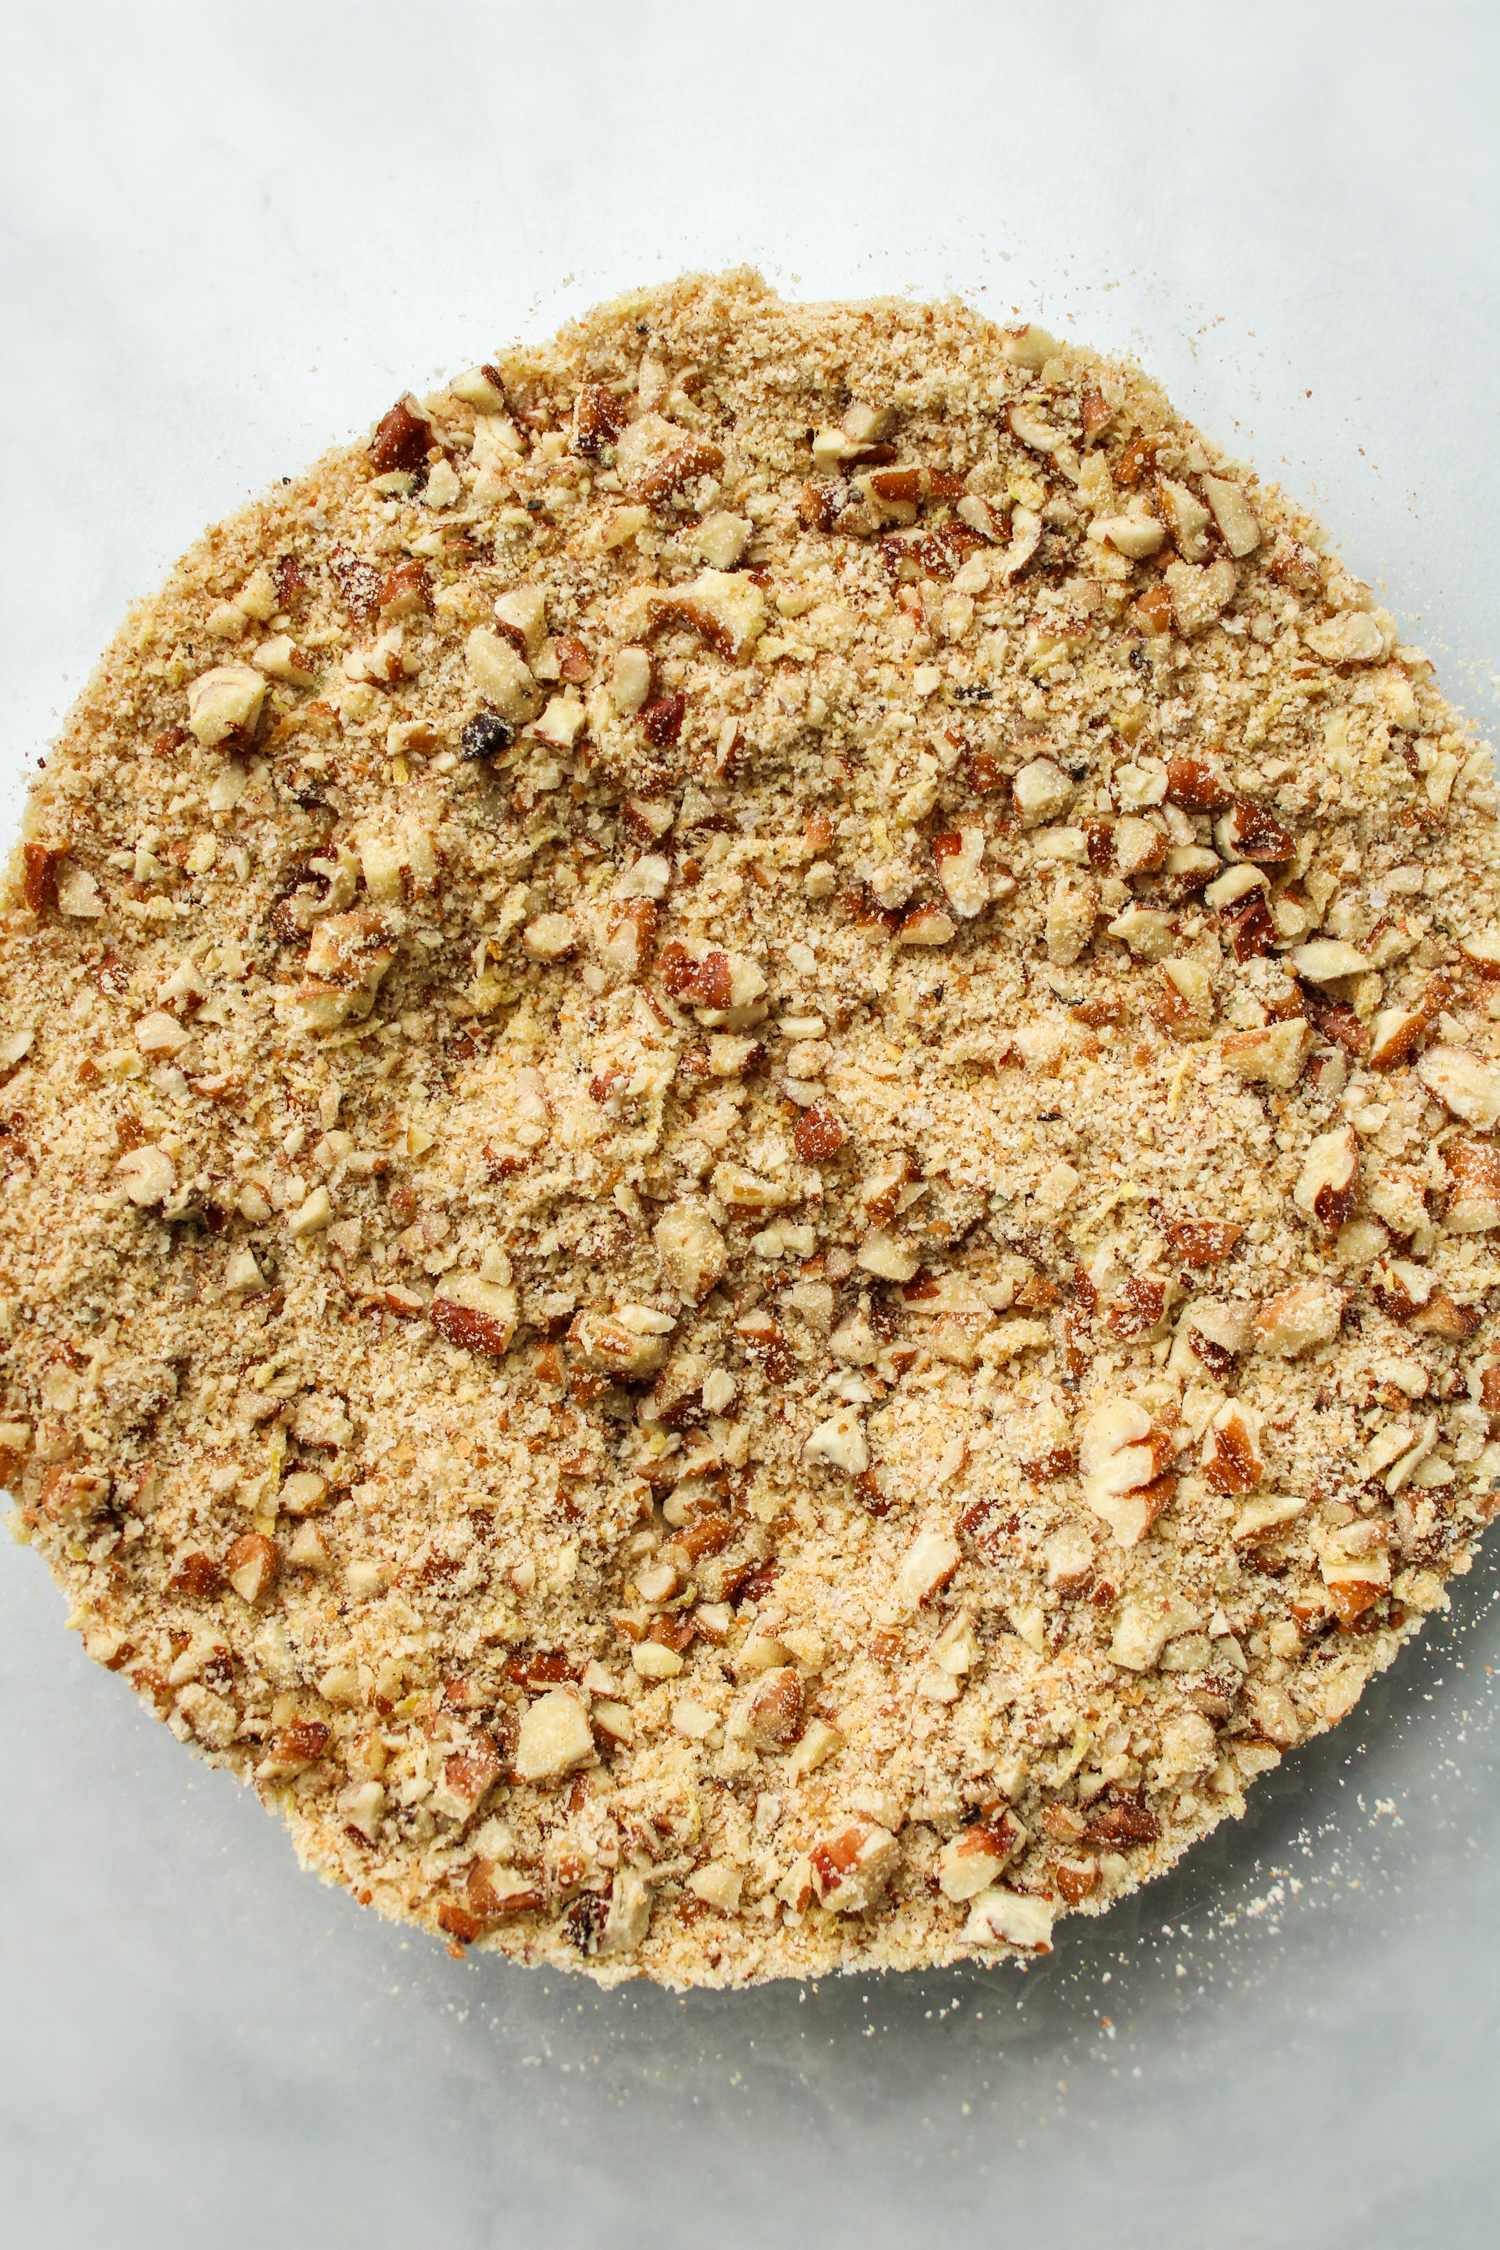 pecan and breadcrumb mixture in a glass bowl